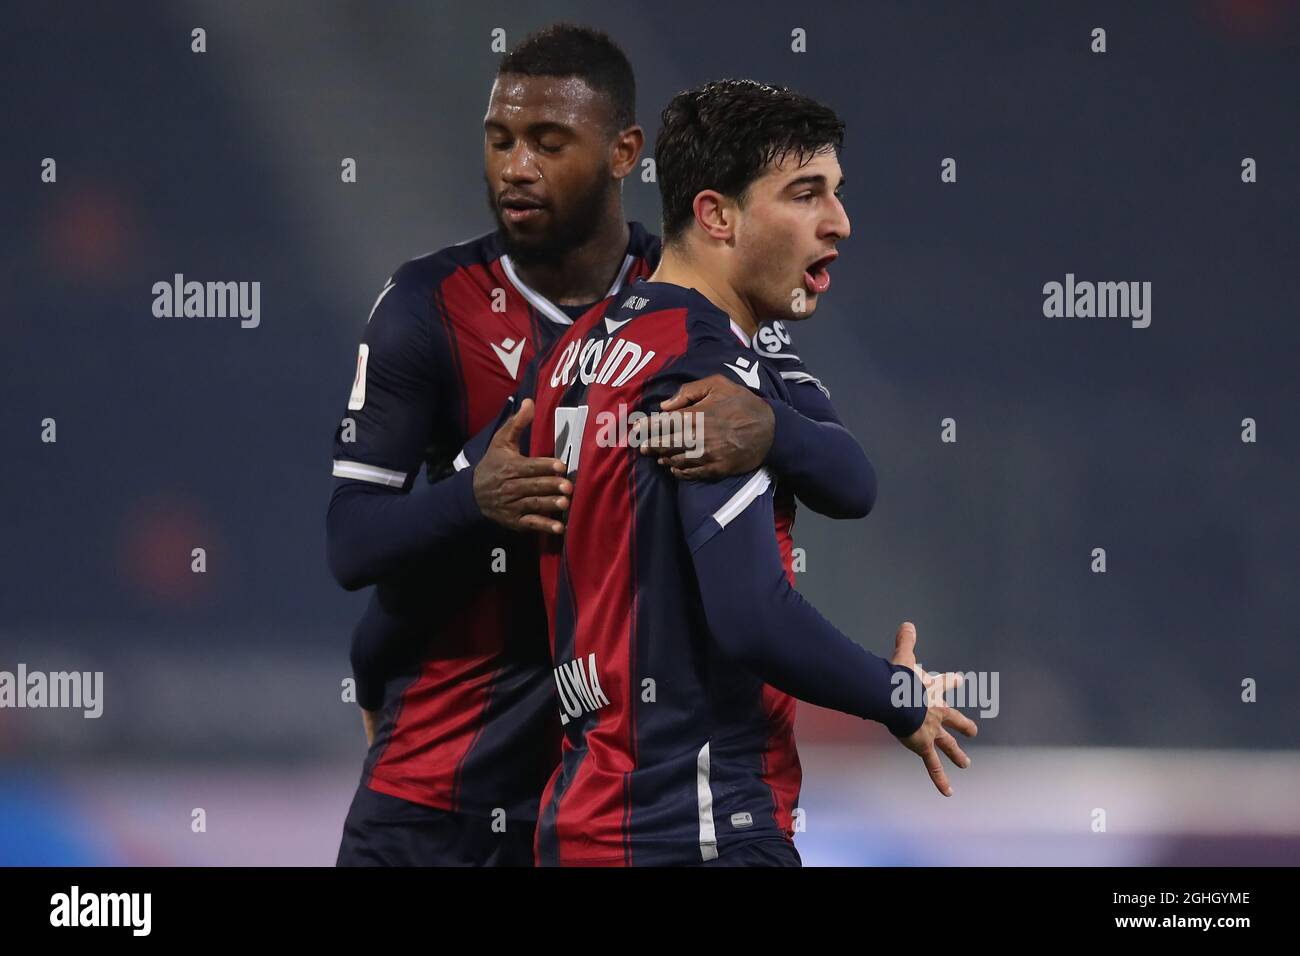 Riccardo Orsolini of Bologna FC celebrates with team mate Stefano Denswil after scoring to give the side a 2-1 lead during the Coppa Italia match at Renato Dall'Ara, Bologna. Picture date: 25th November 2020. Picture credit should read: Jonathan Moscrop/Sportimage via PA Images Stock Photo